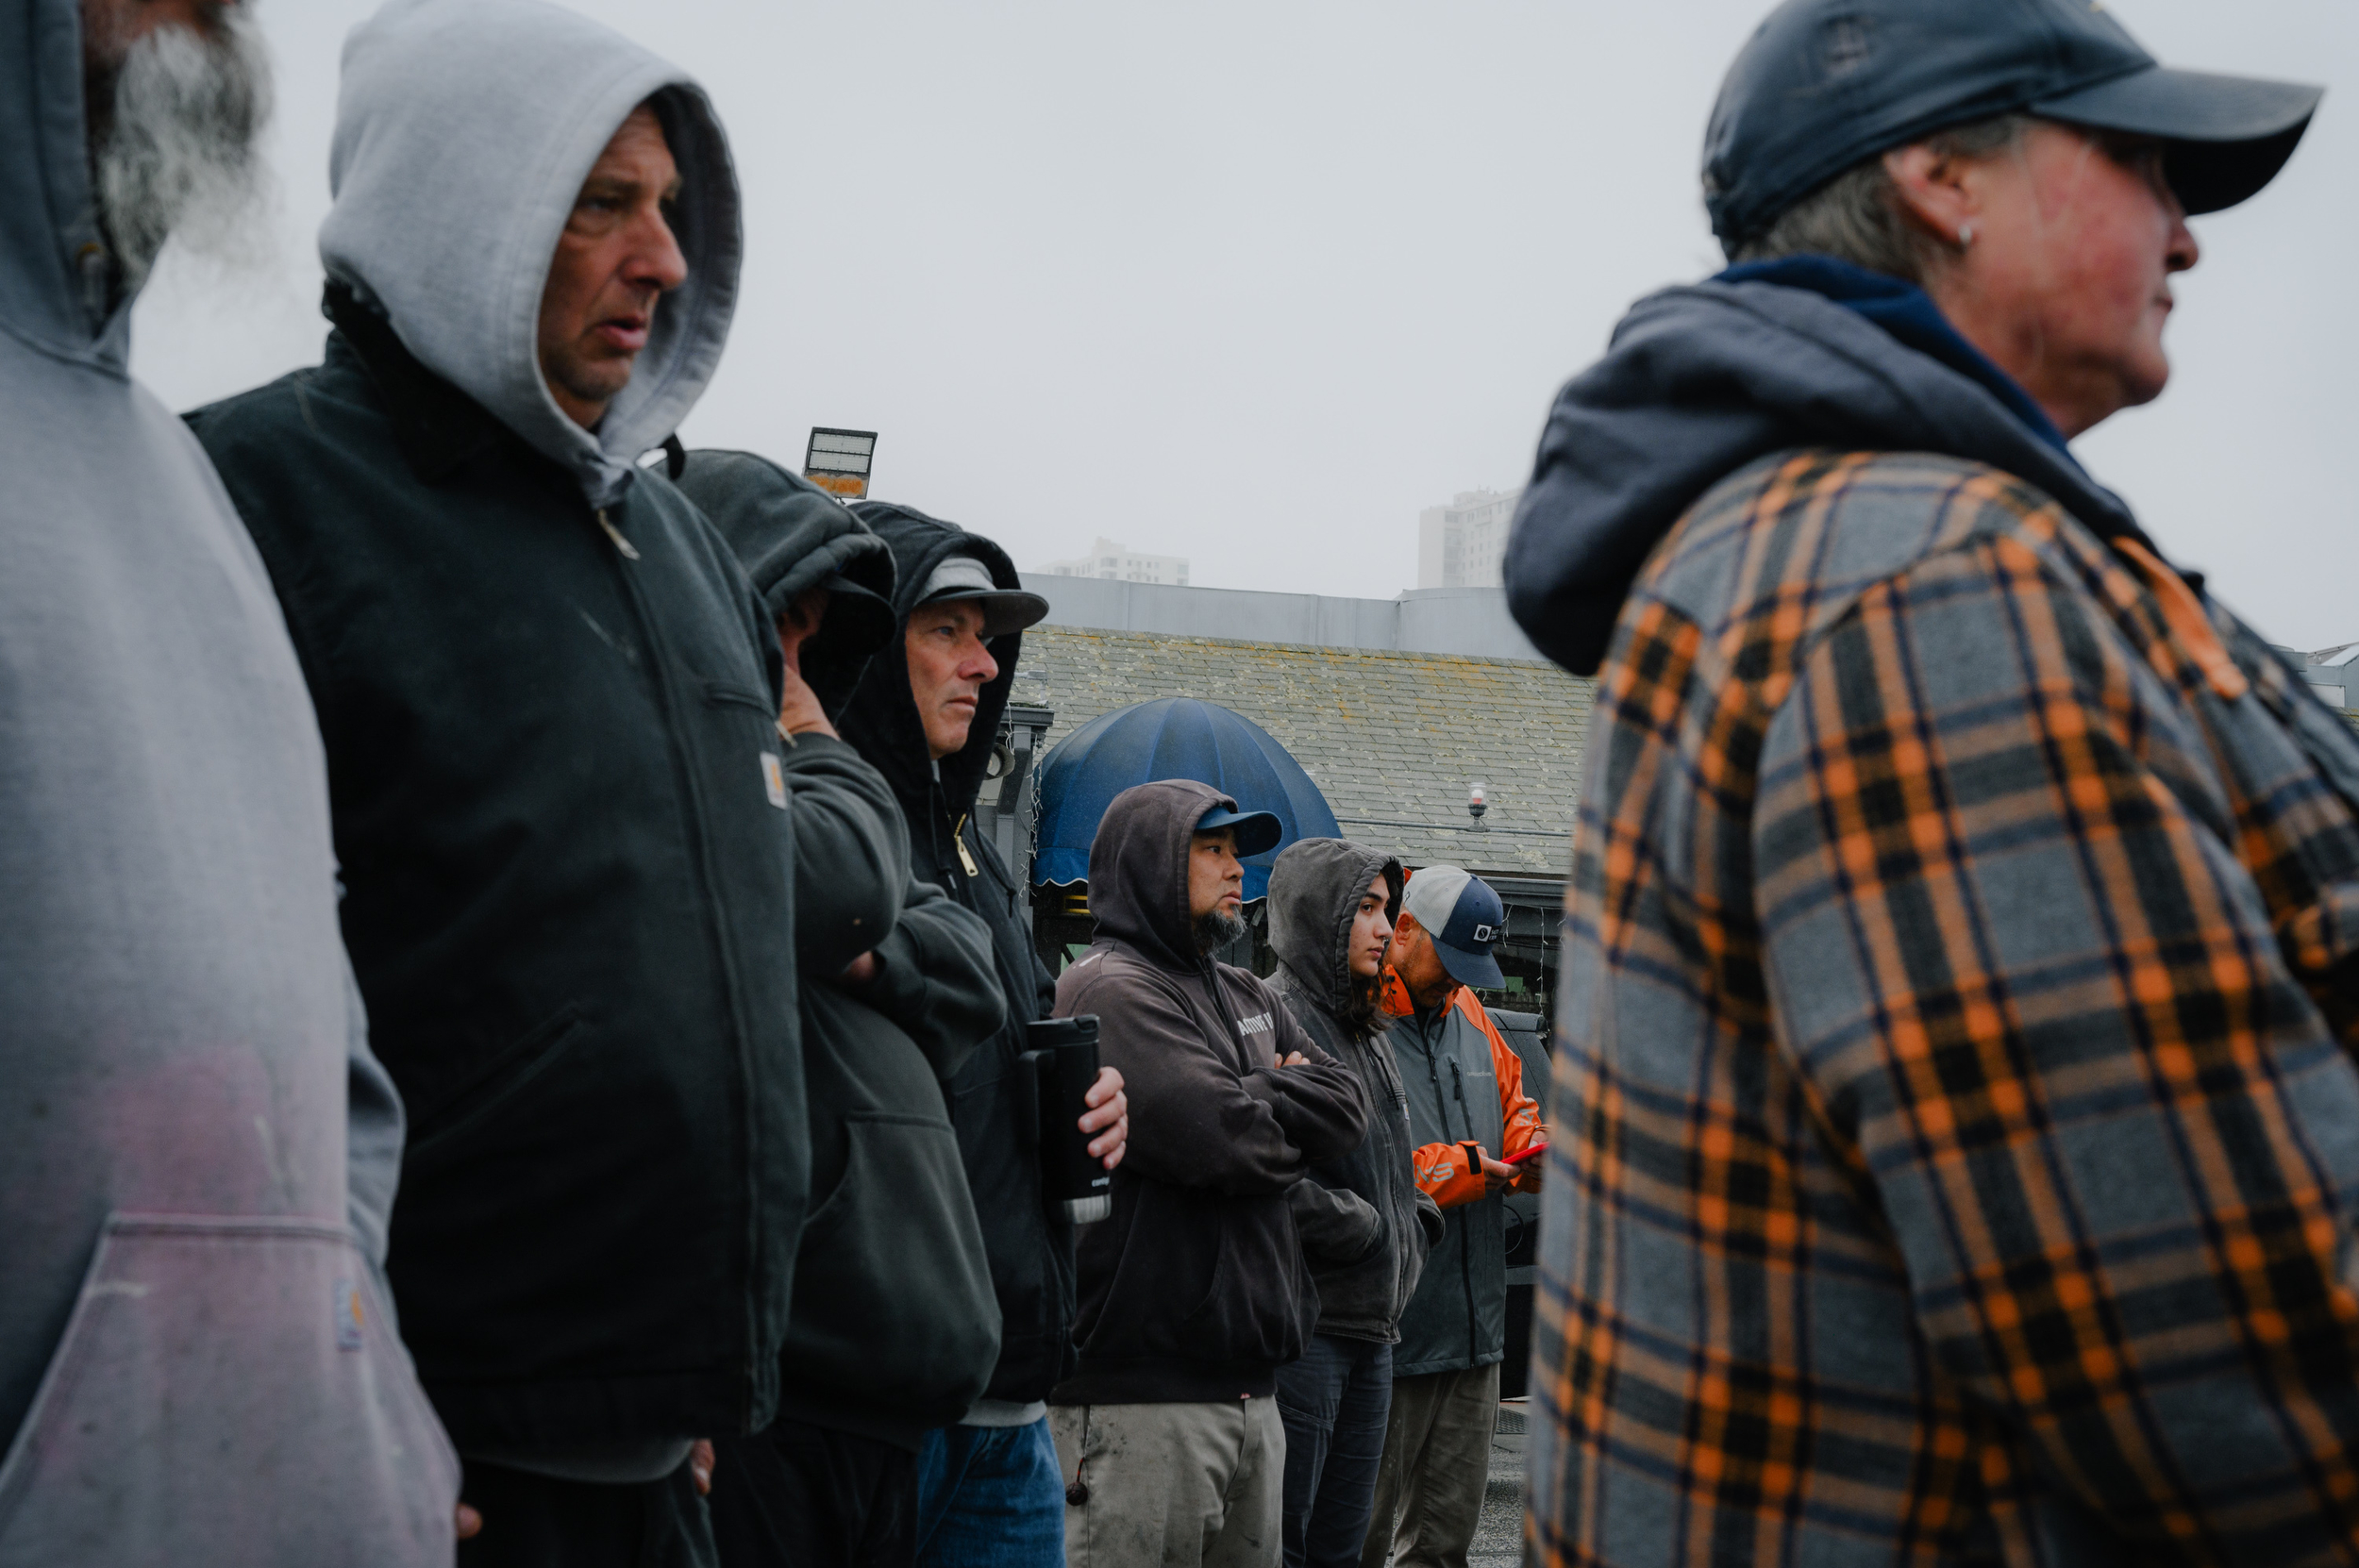 A group of people wearing jackets and sweatshirts with their hoods up and baseball caps all look in the same direction on a gray day.